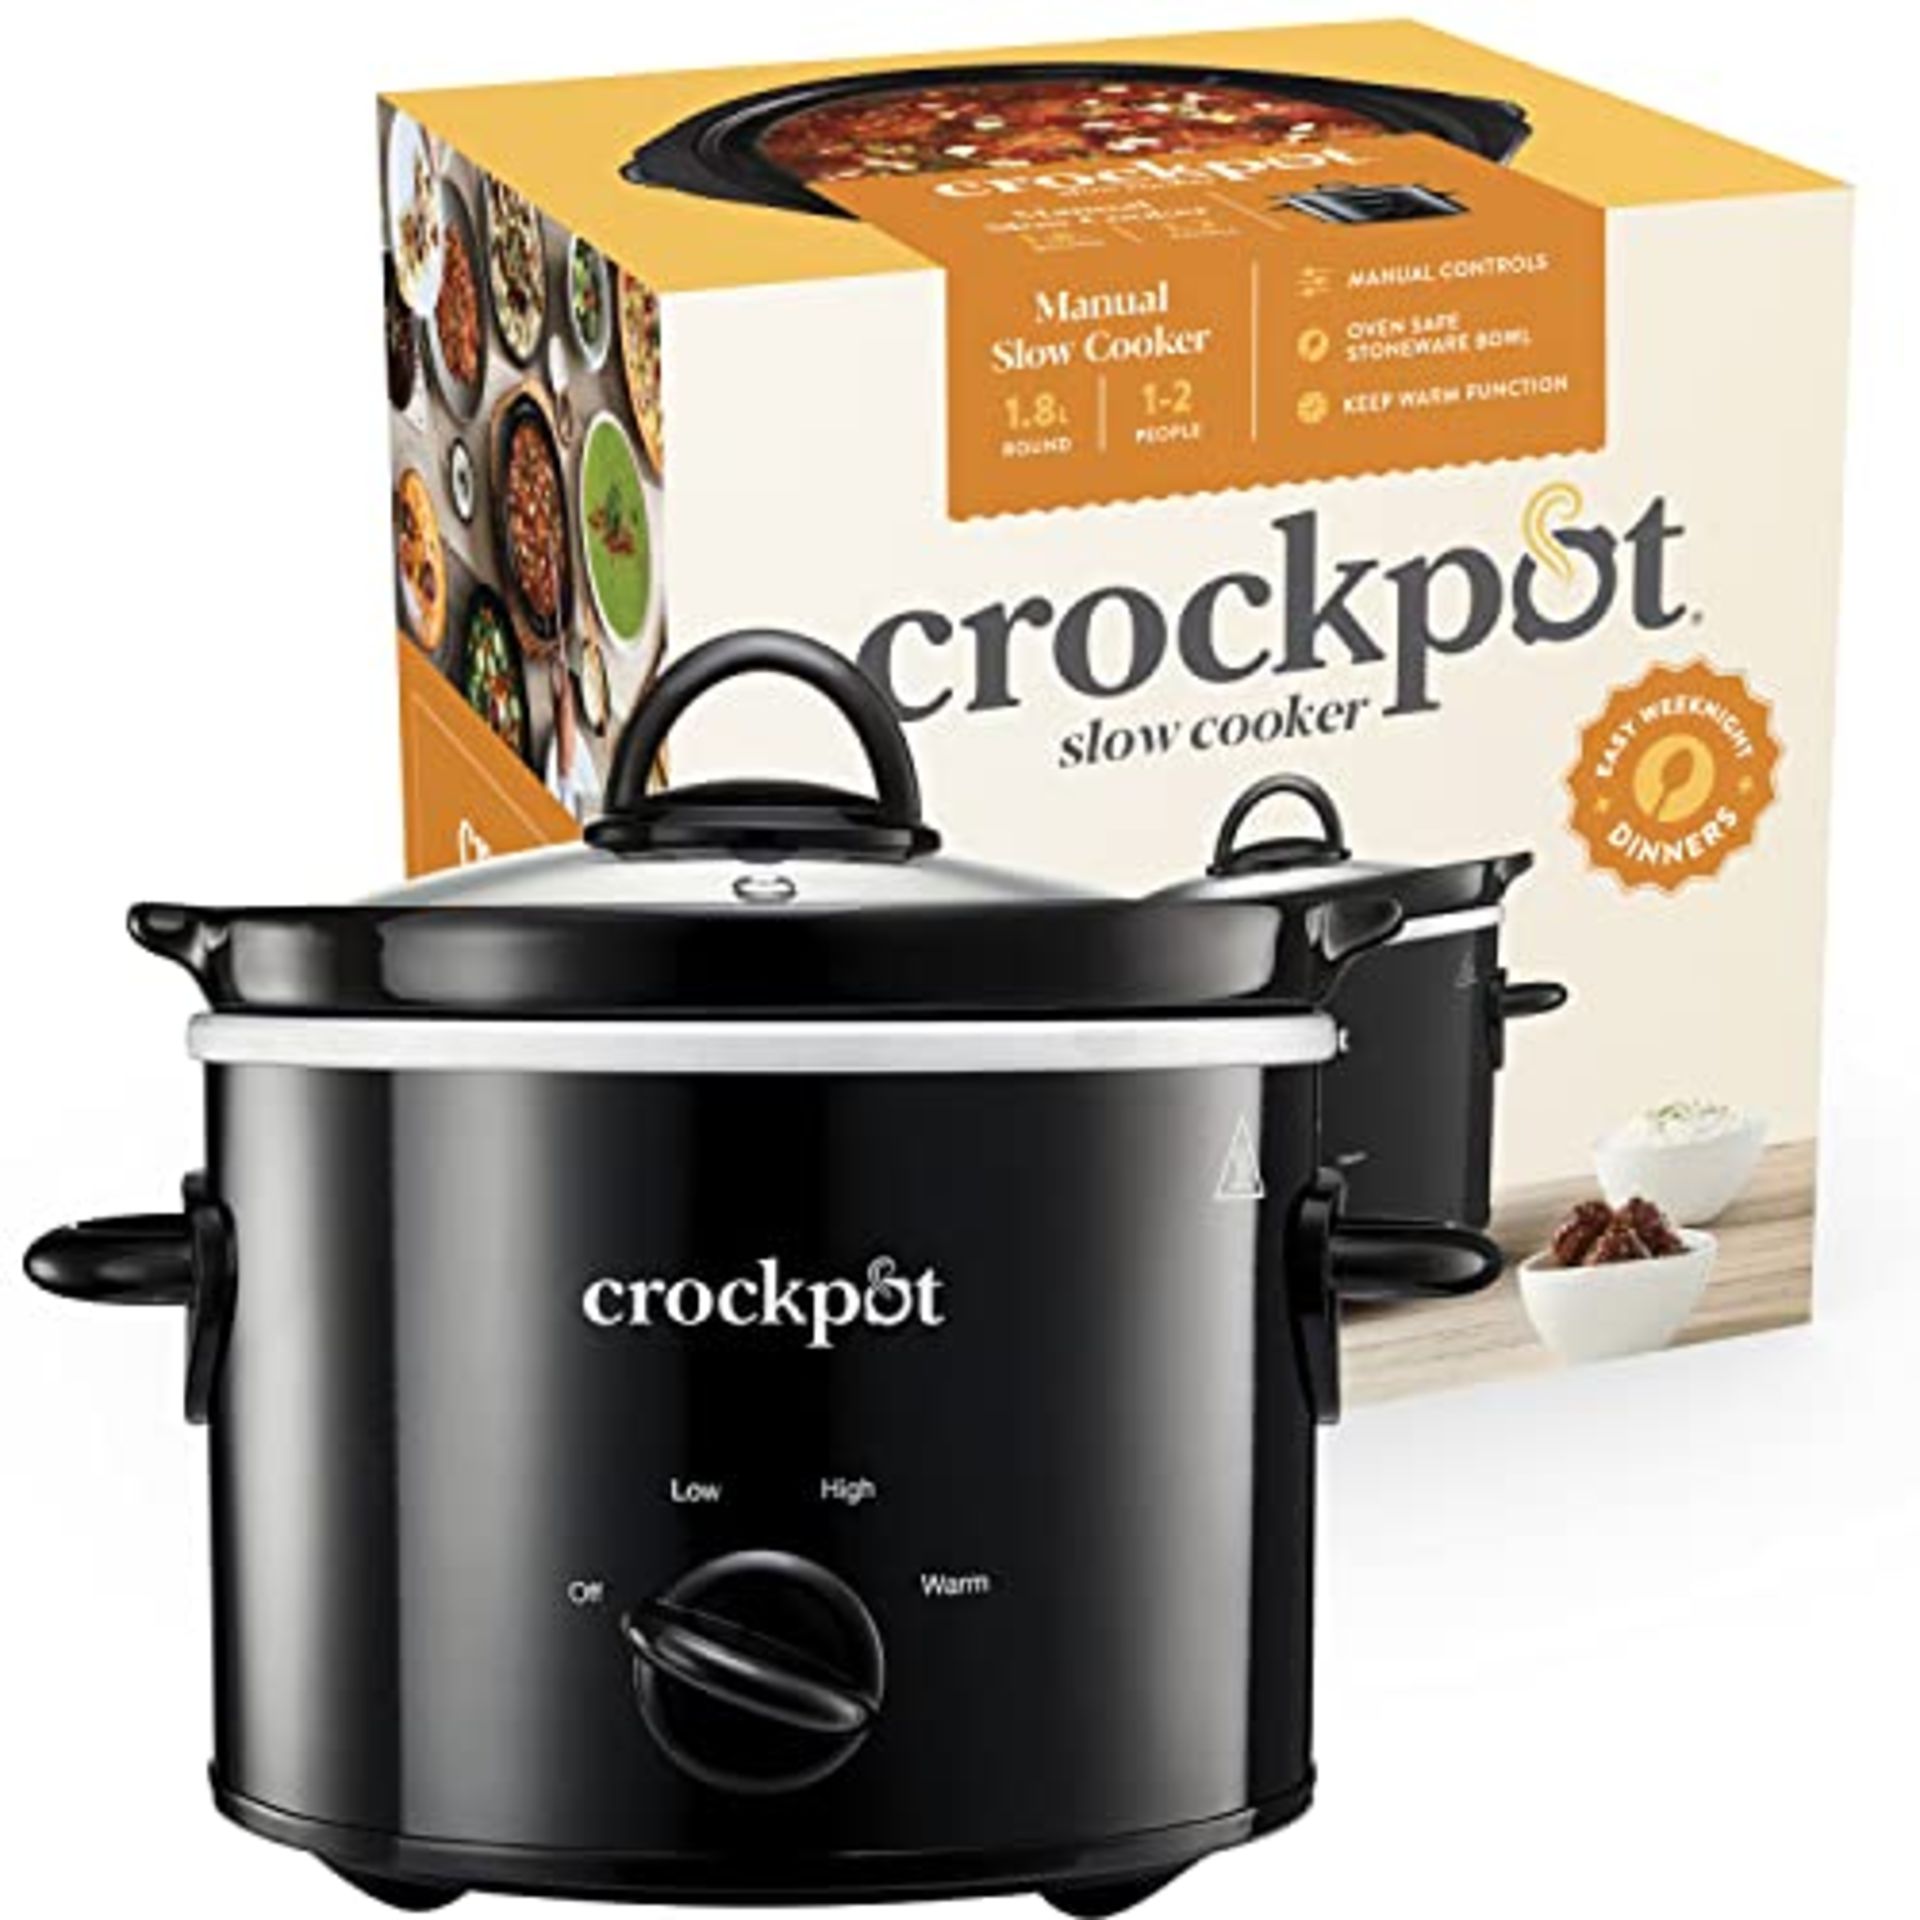 Crockpot Slow Cooker | Removable Easy-Clean Ceramic Bowl | 1.8 L Small Slow Cooker (Se